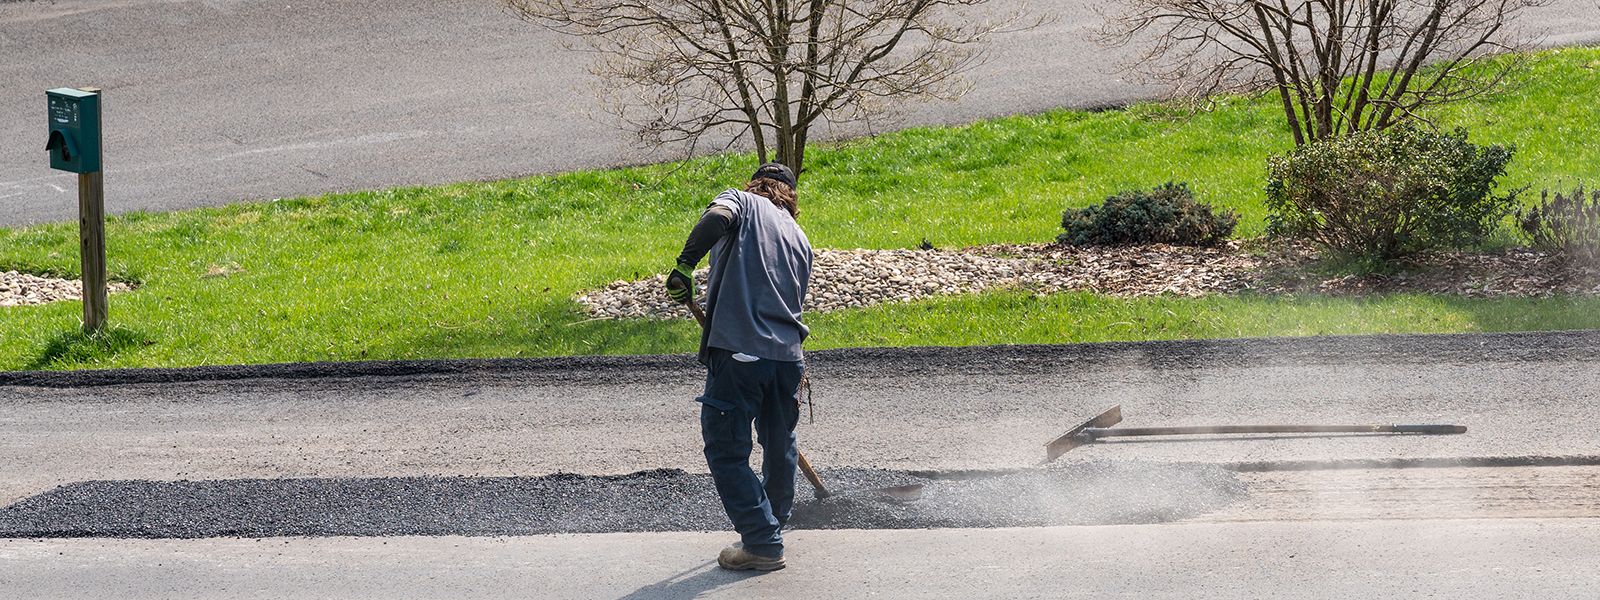 driveway repairs and patching in nh and mass